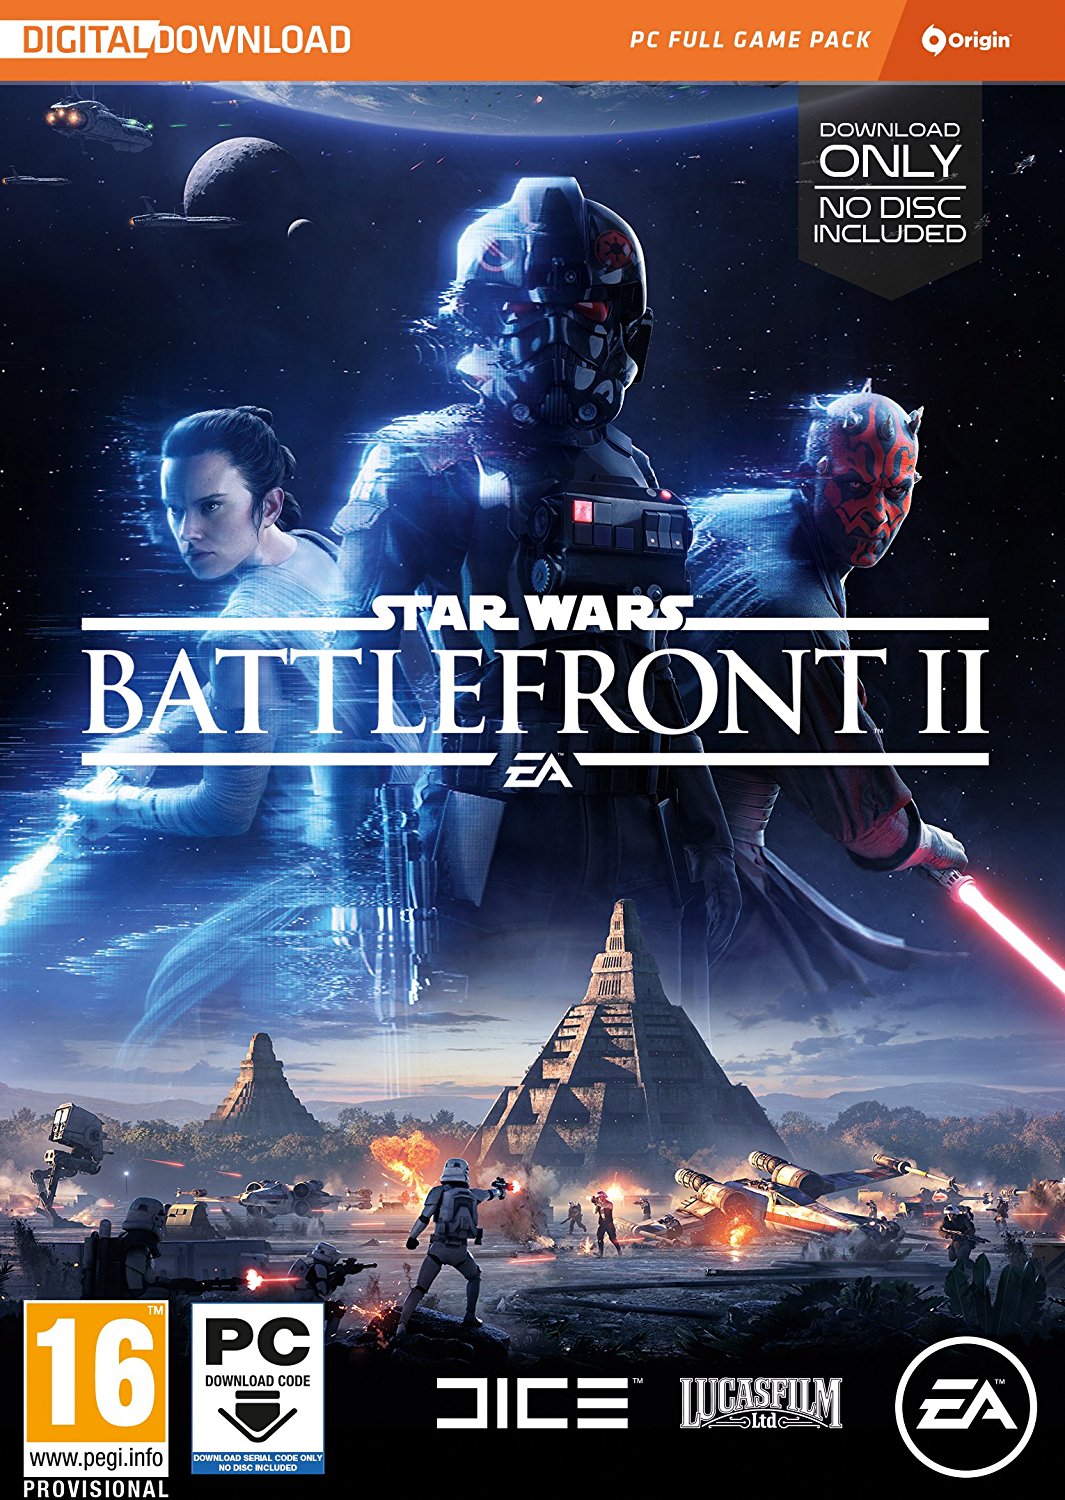 Star Wars Battlefront 2 CD Key for Origin - Buy now and receive your key instantly